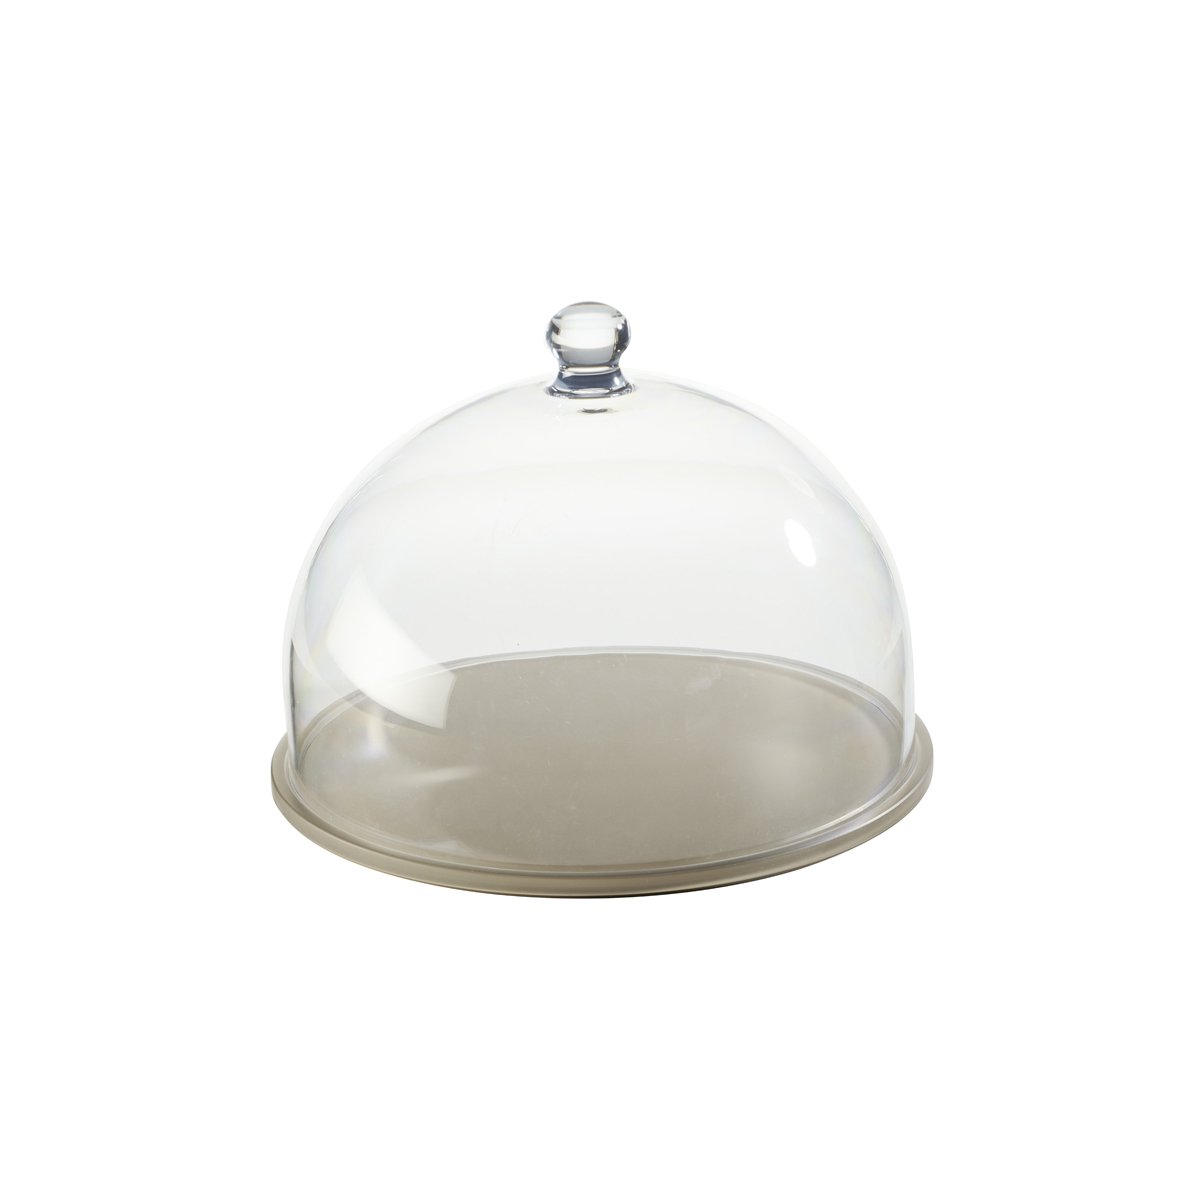 MLP116625 Mealplak Round Tray With Cloche Taupe 230x180mm Tomkin Australia Hospitality Supplies